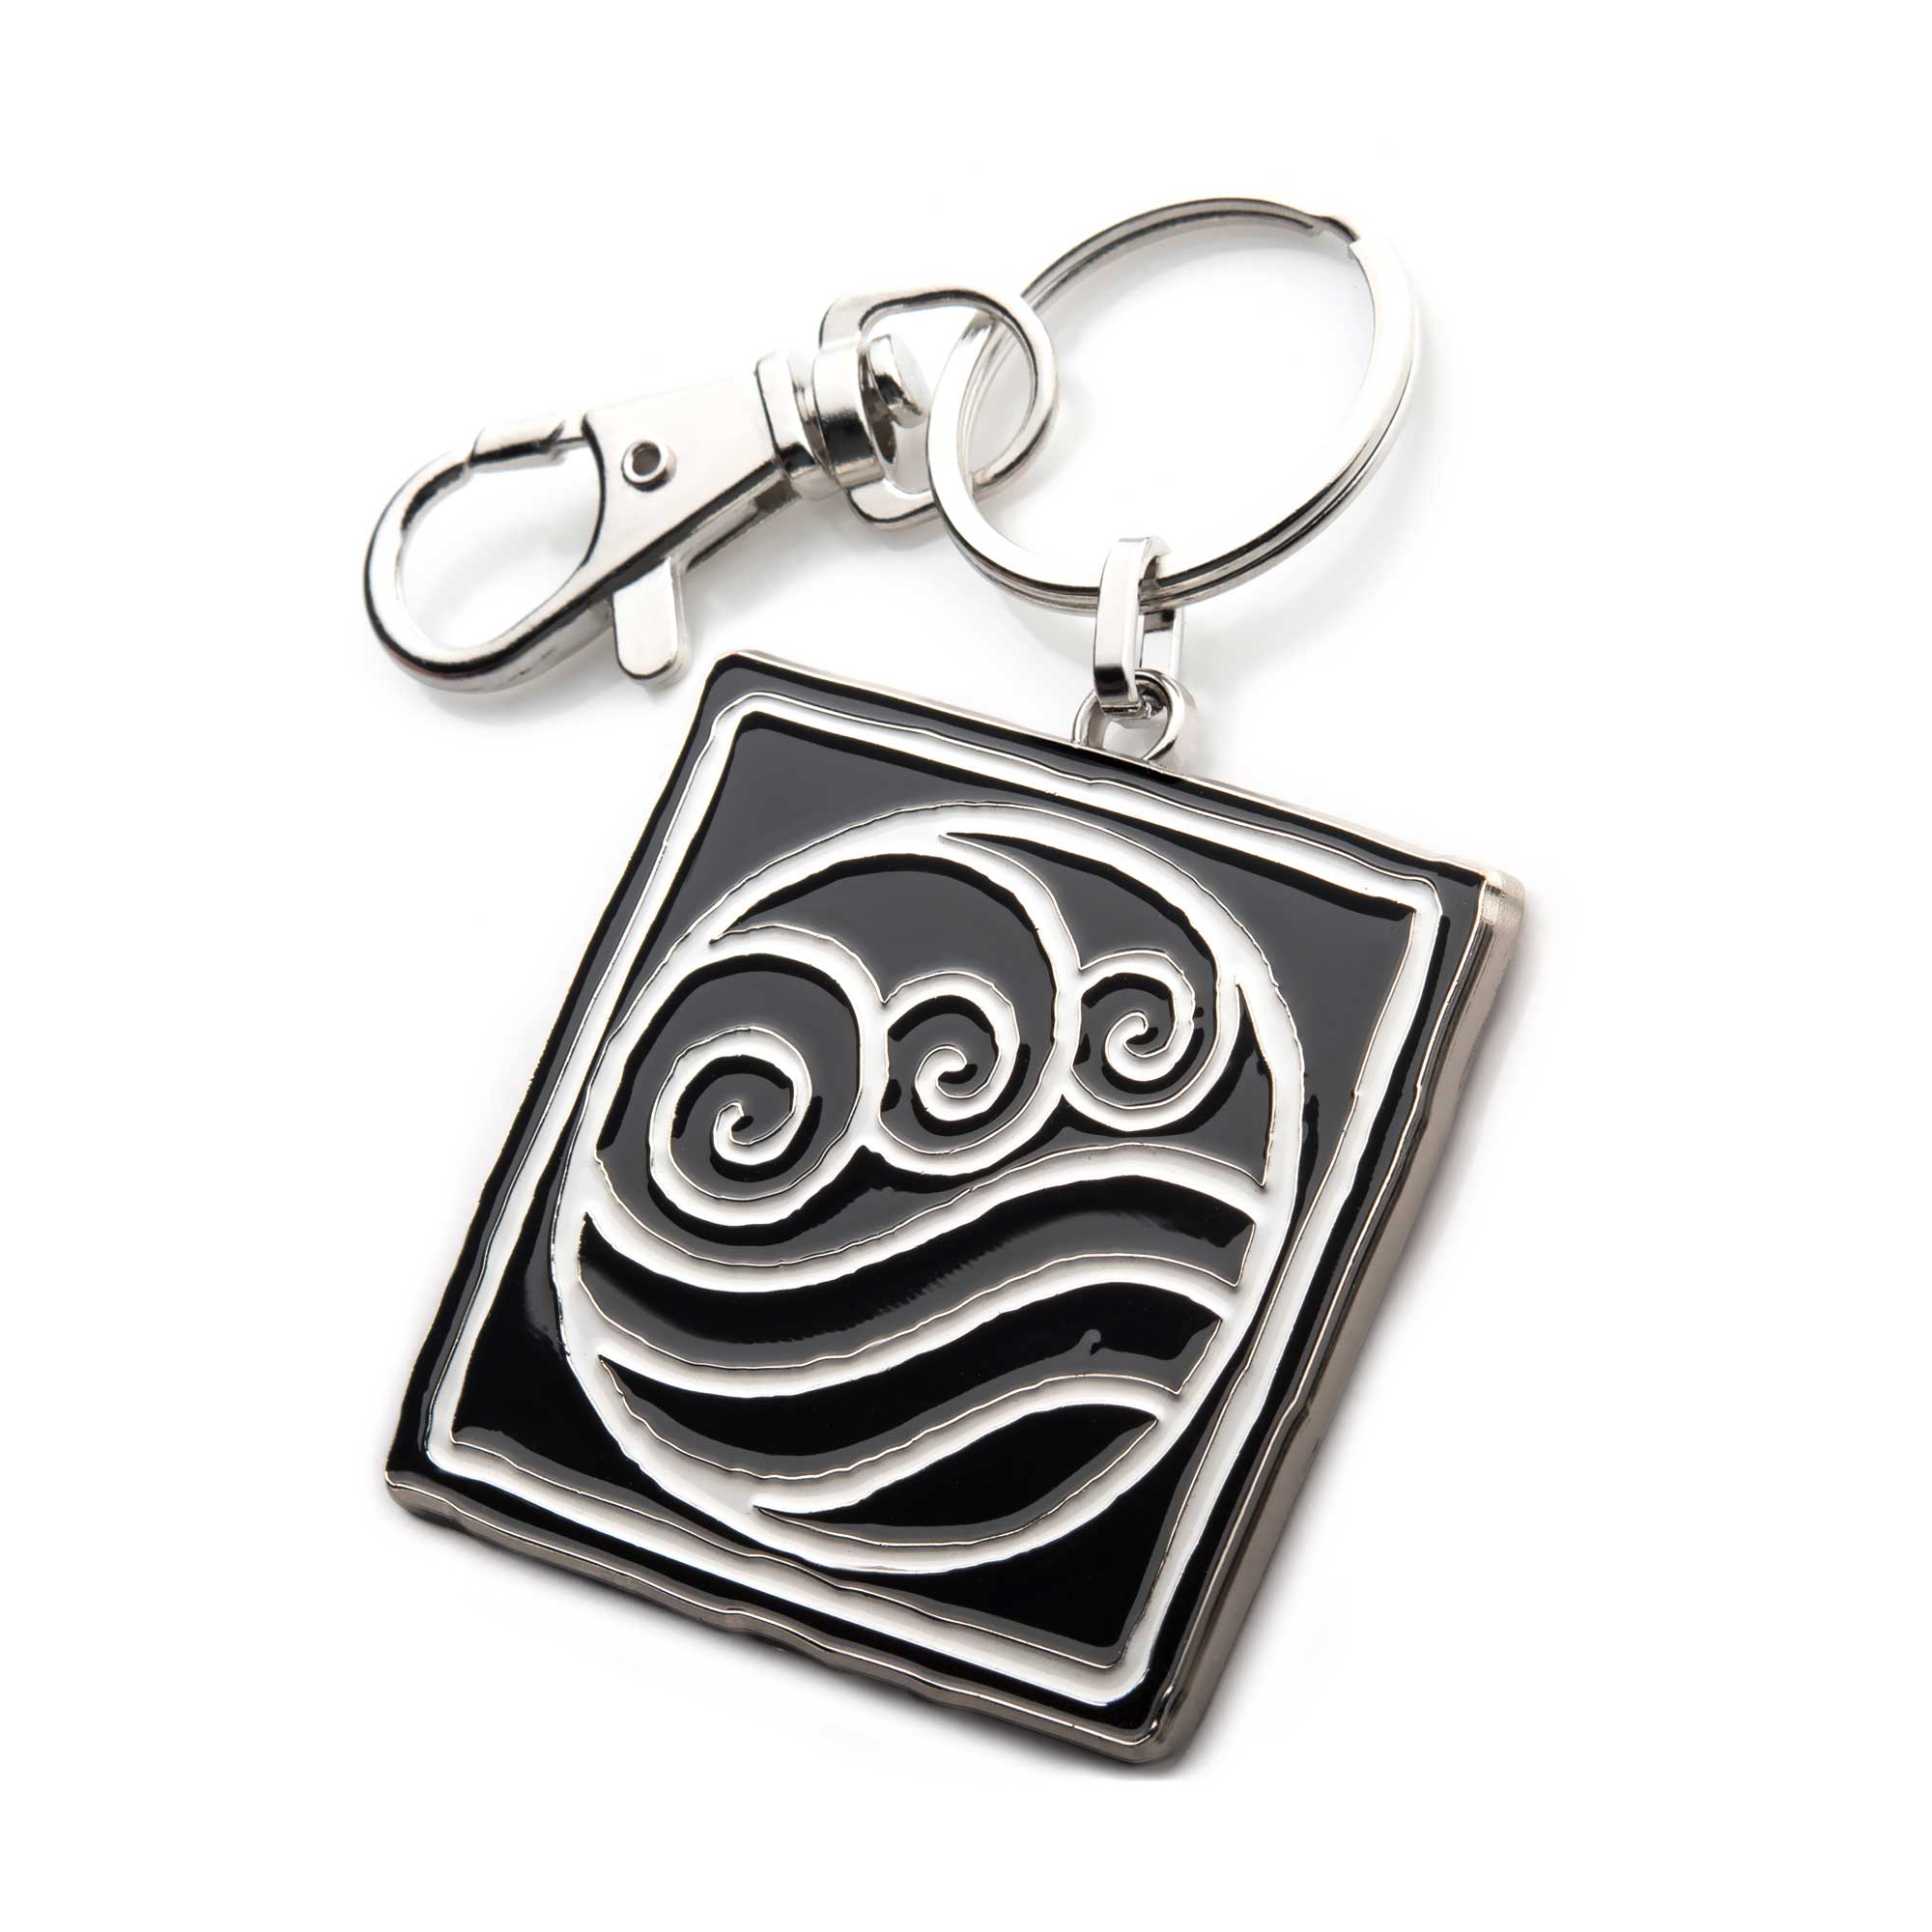 Nickelodeon Avatar: The Last Airbender The Water Tribe Symbol Keychain